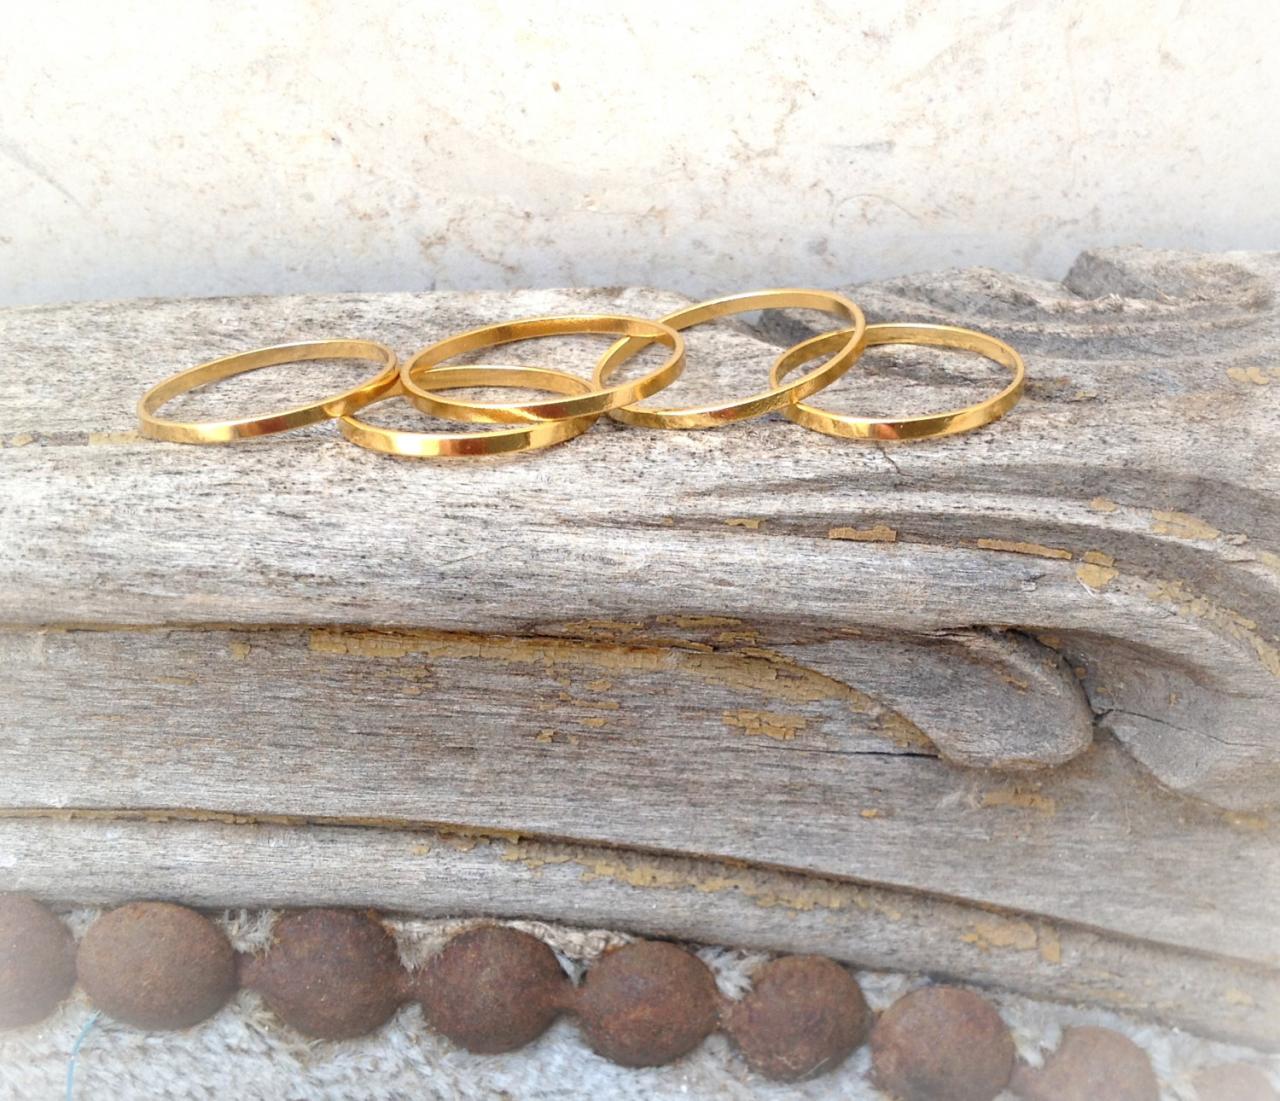 4 Gold Rings, Stacking Rings, Knuckle Rings, Thin Ring, Tiny Ring, Gold Knuckle Rings, Set Of Knuckle Rings, Wire Ring - 6611